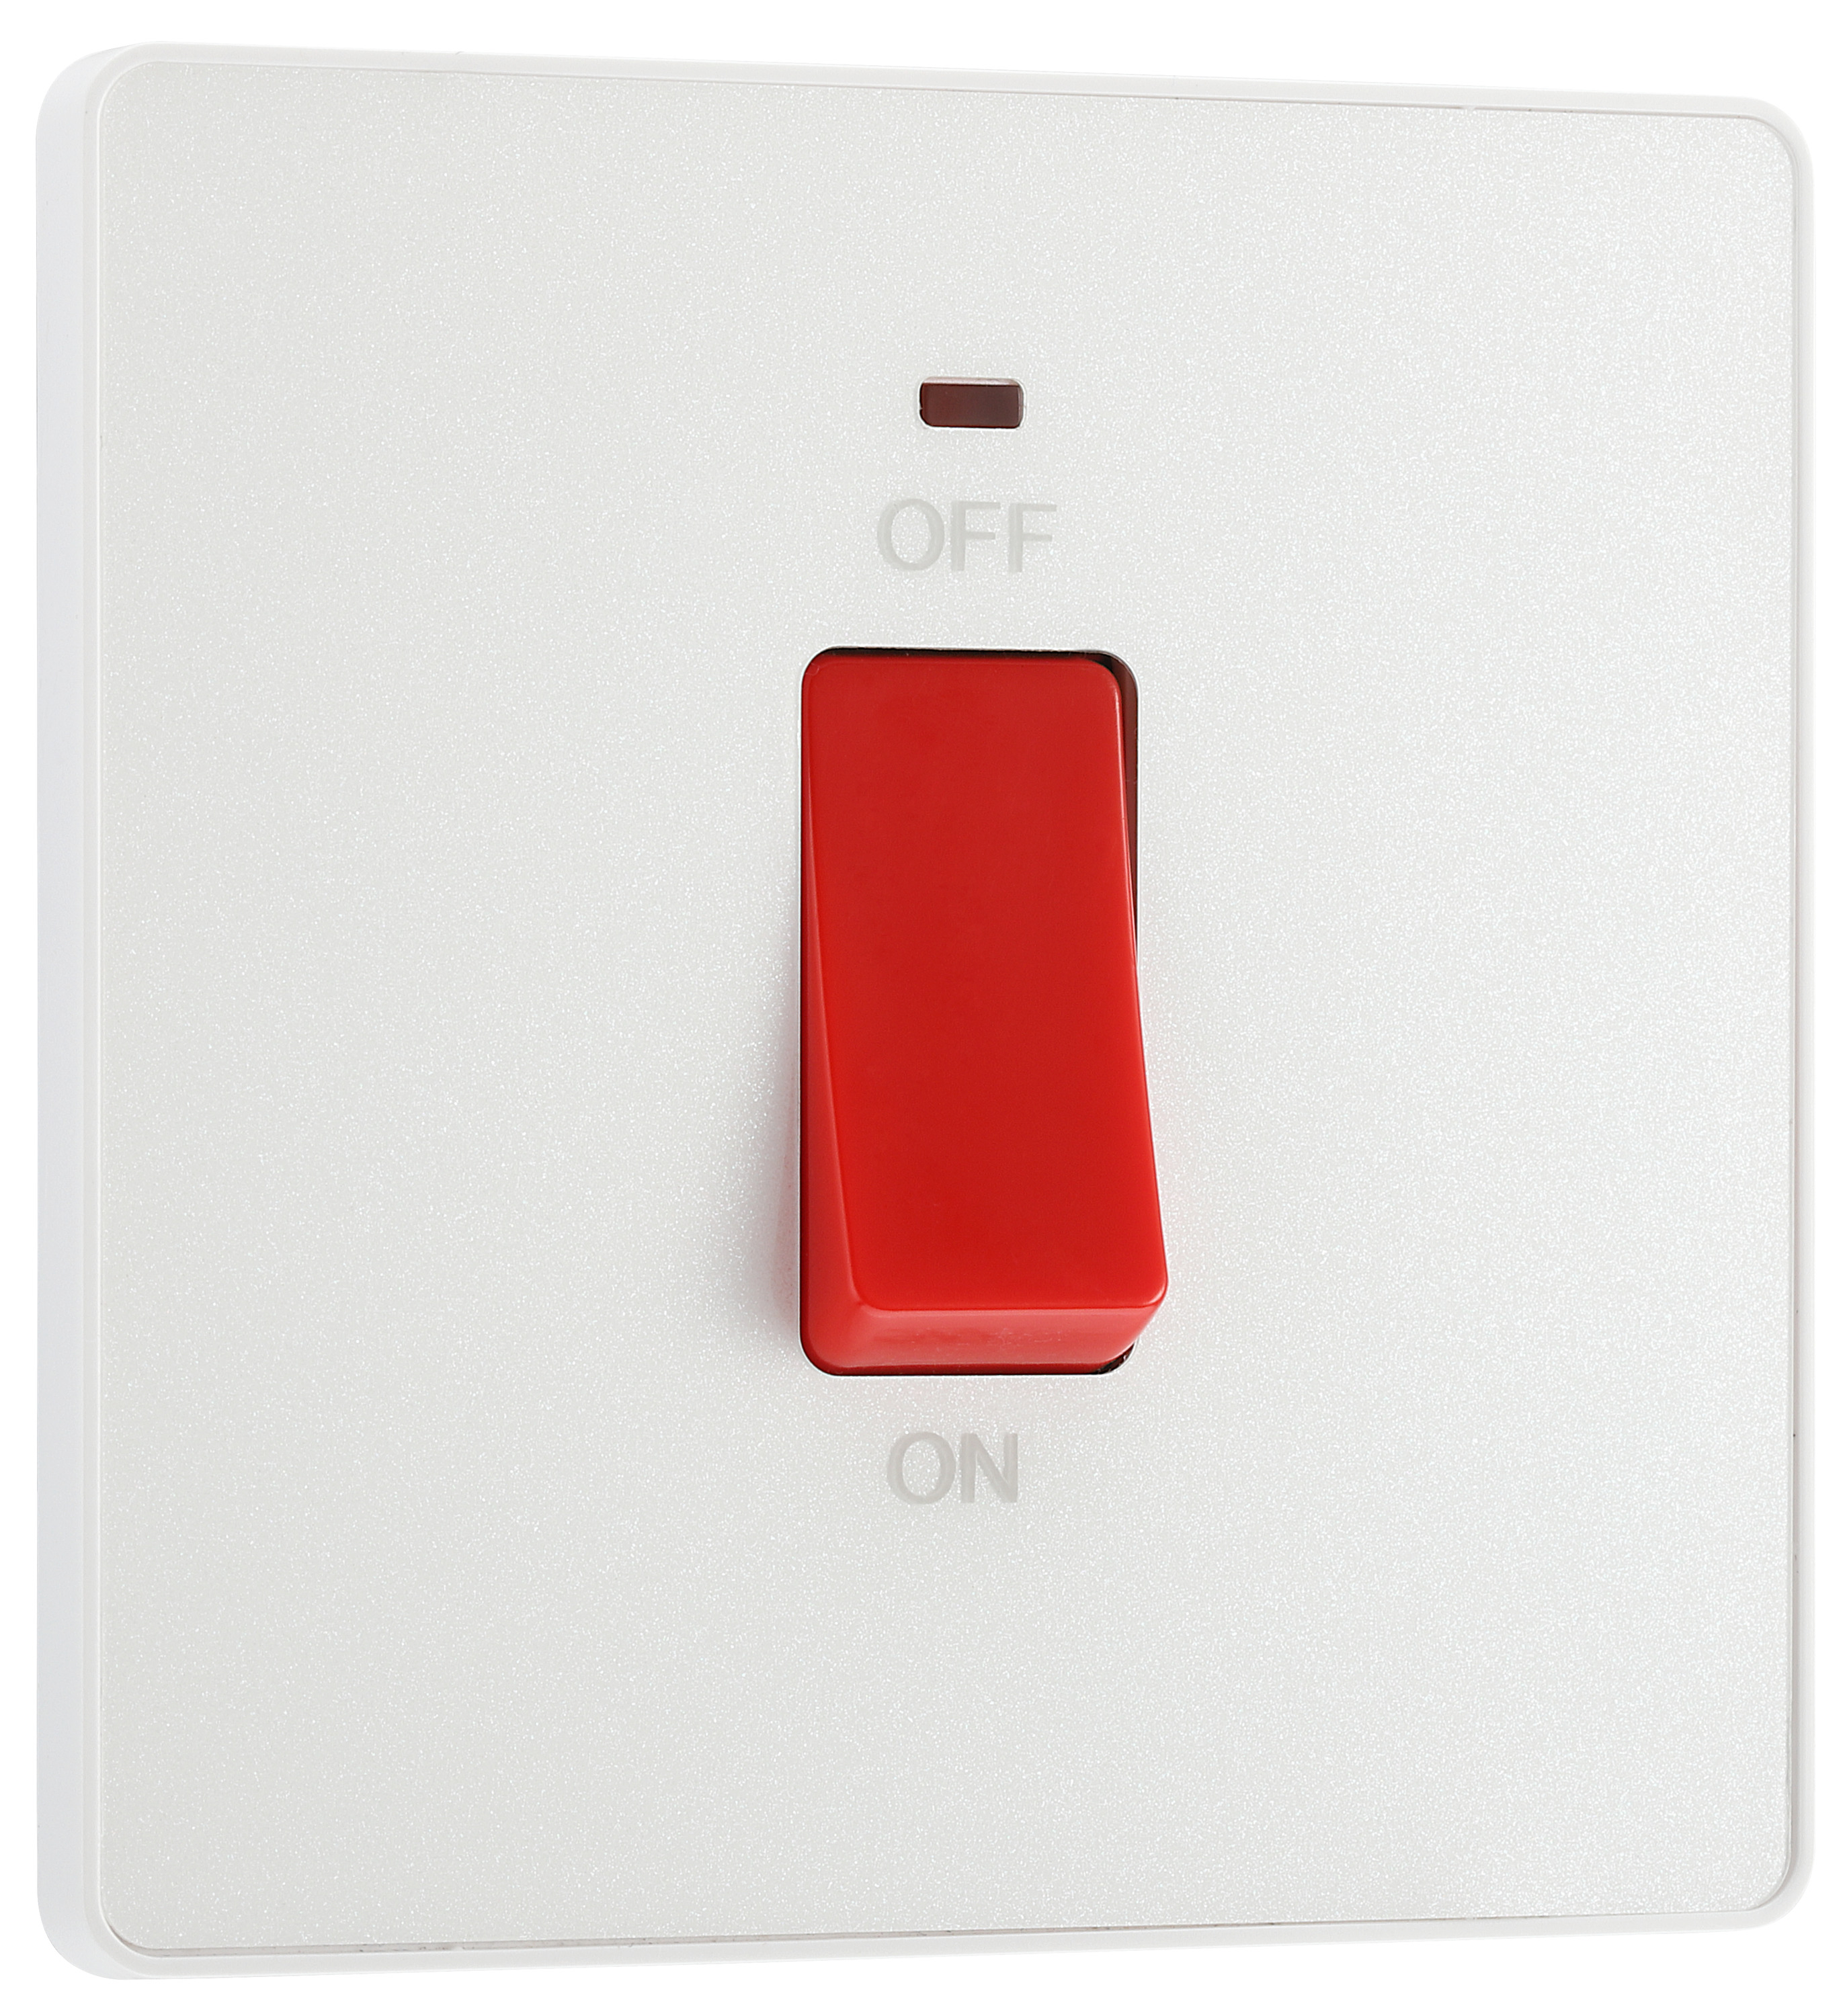 Image of BG Evolve Pearlescent White 45A Square Double Pole Switch with LED Power Indicator